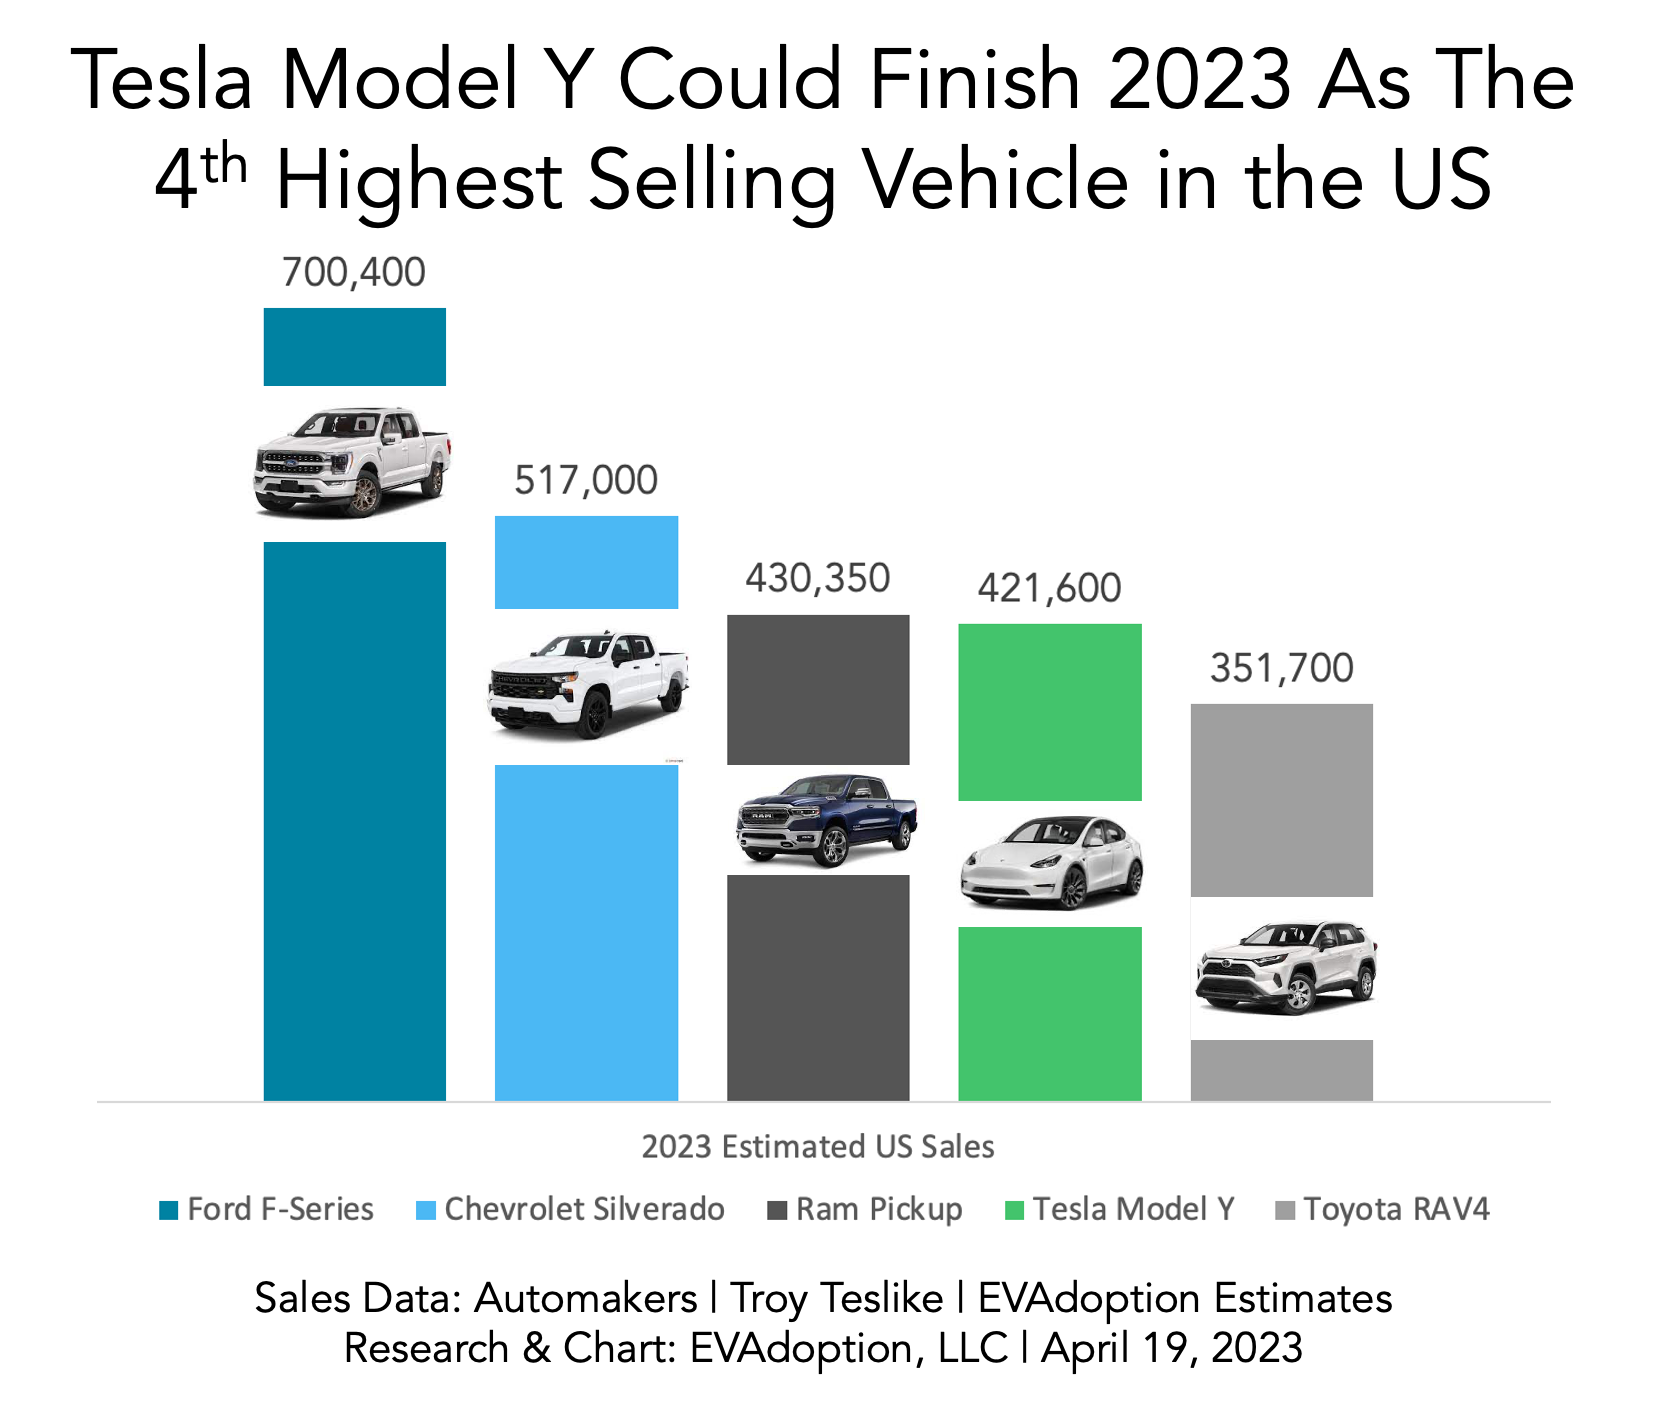 Tesla Model Y Should Finish 2023 as the 4th Highest-Selling Vehicle in the US